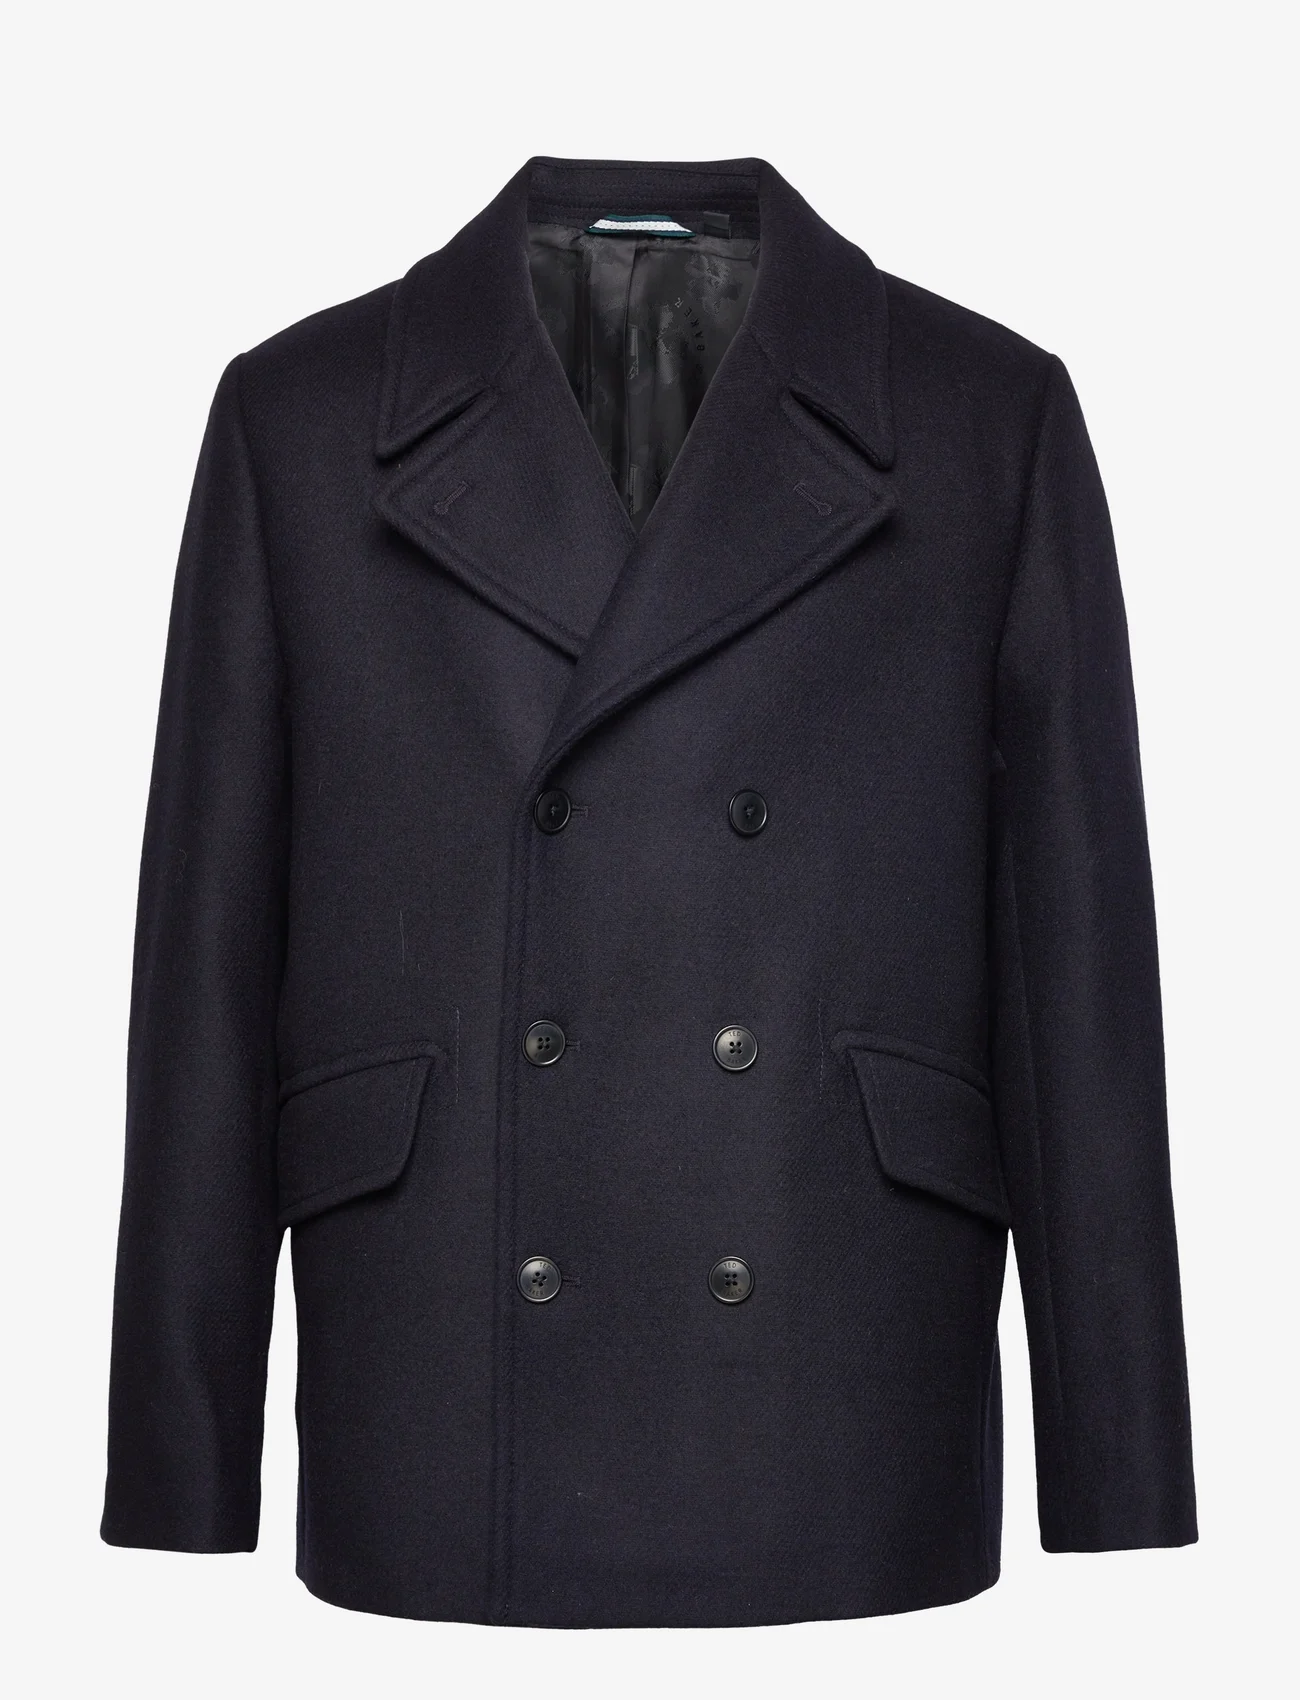 Ted Baker London - FLASBY - winter jackets - navy - 0